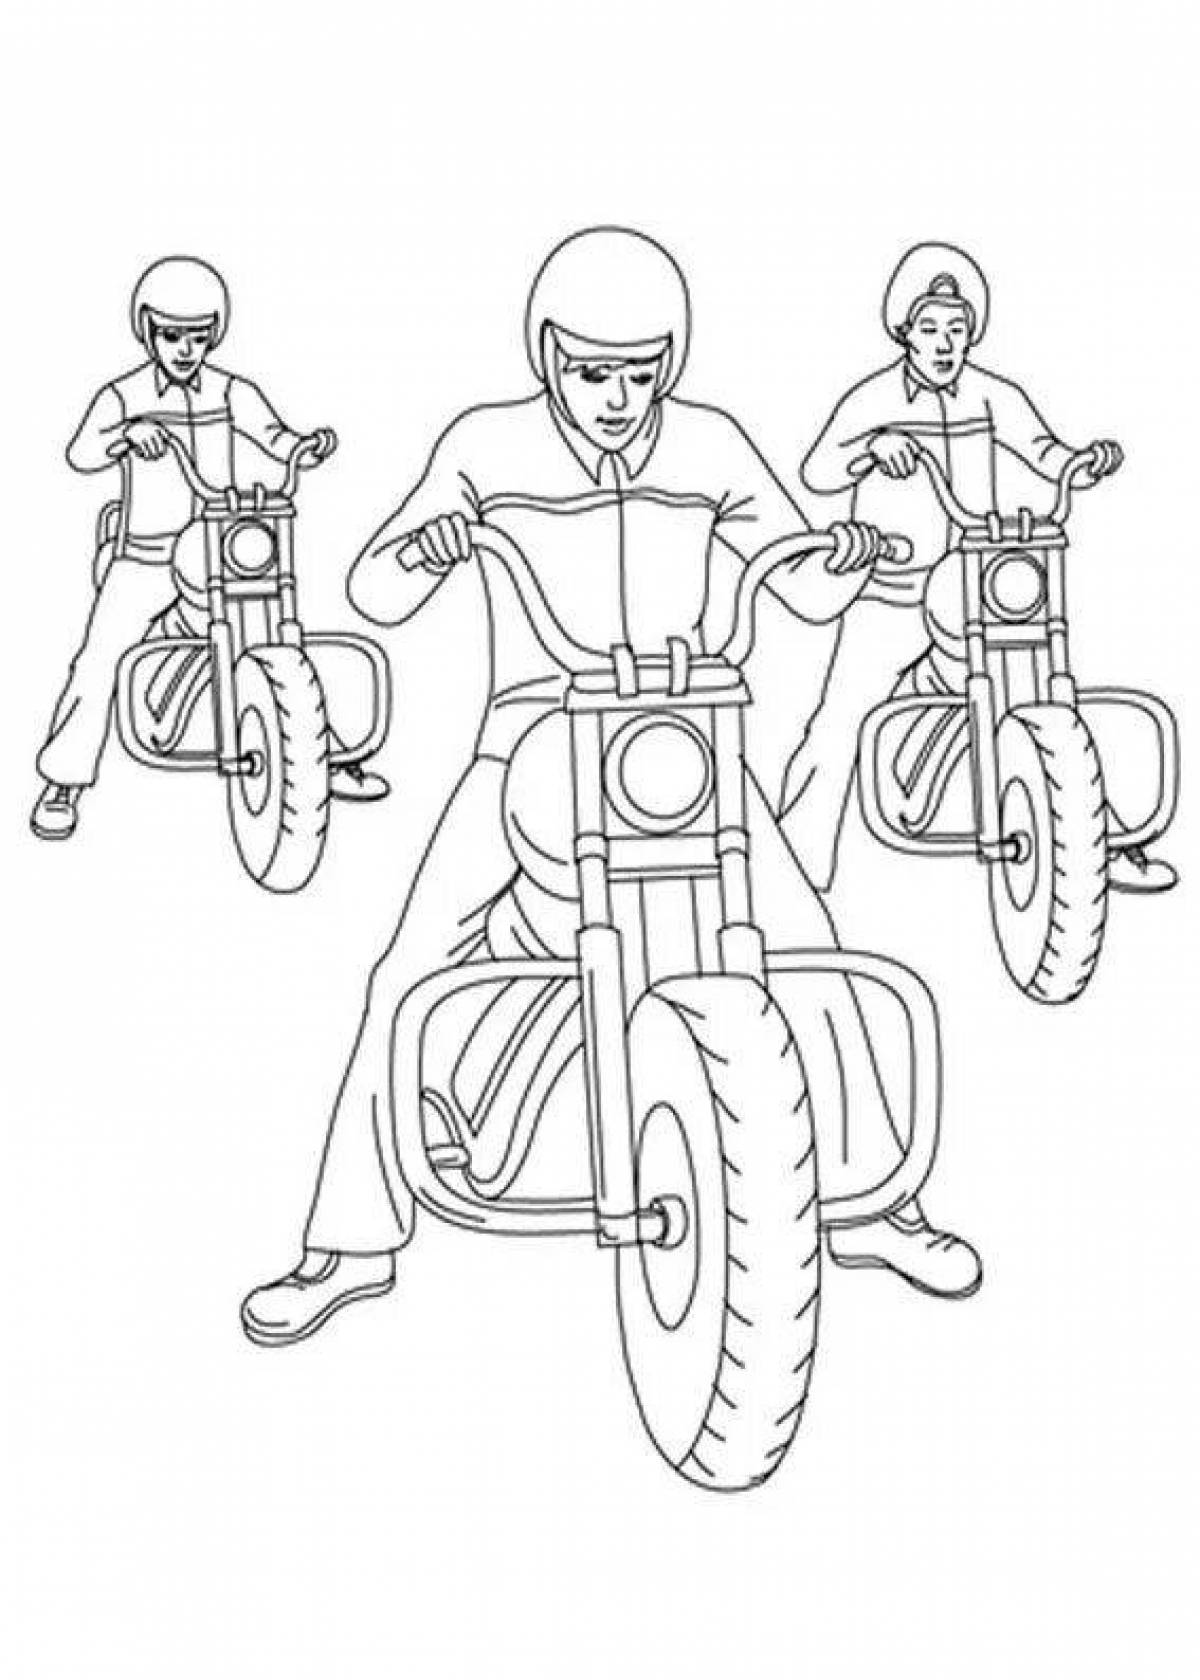 Fiery motorcyclist coloring page